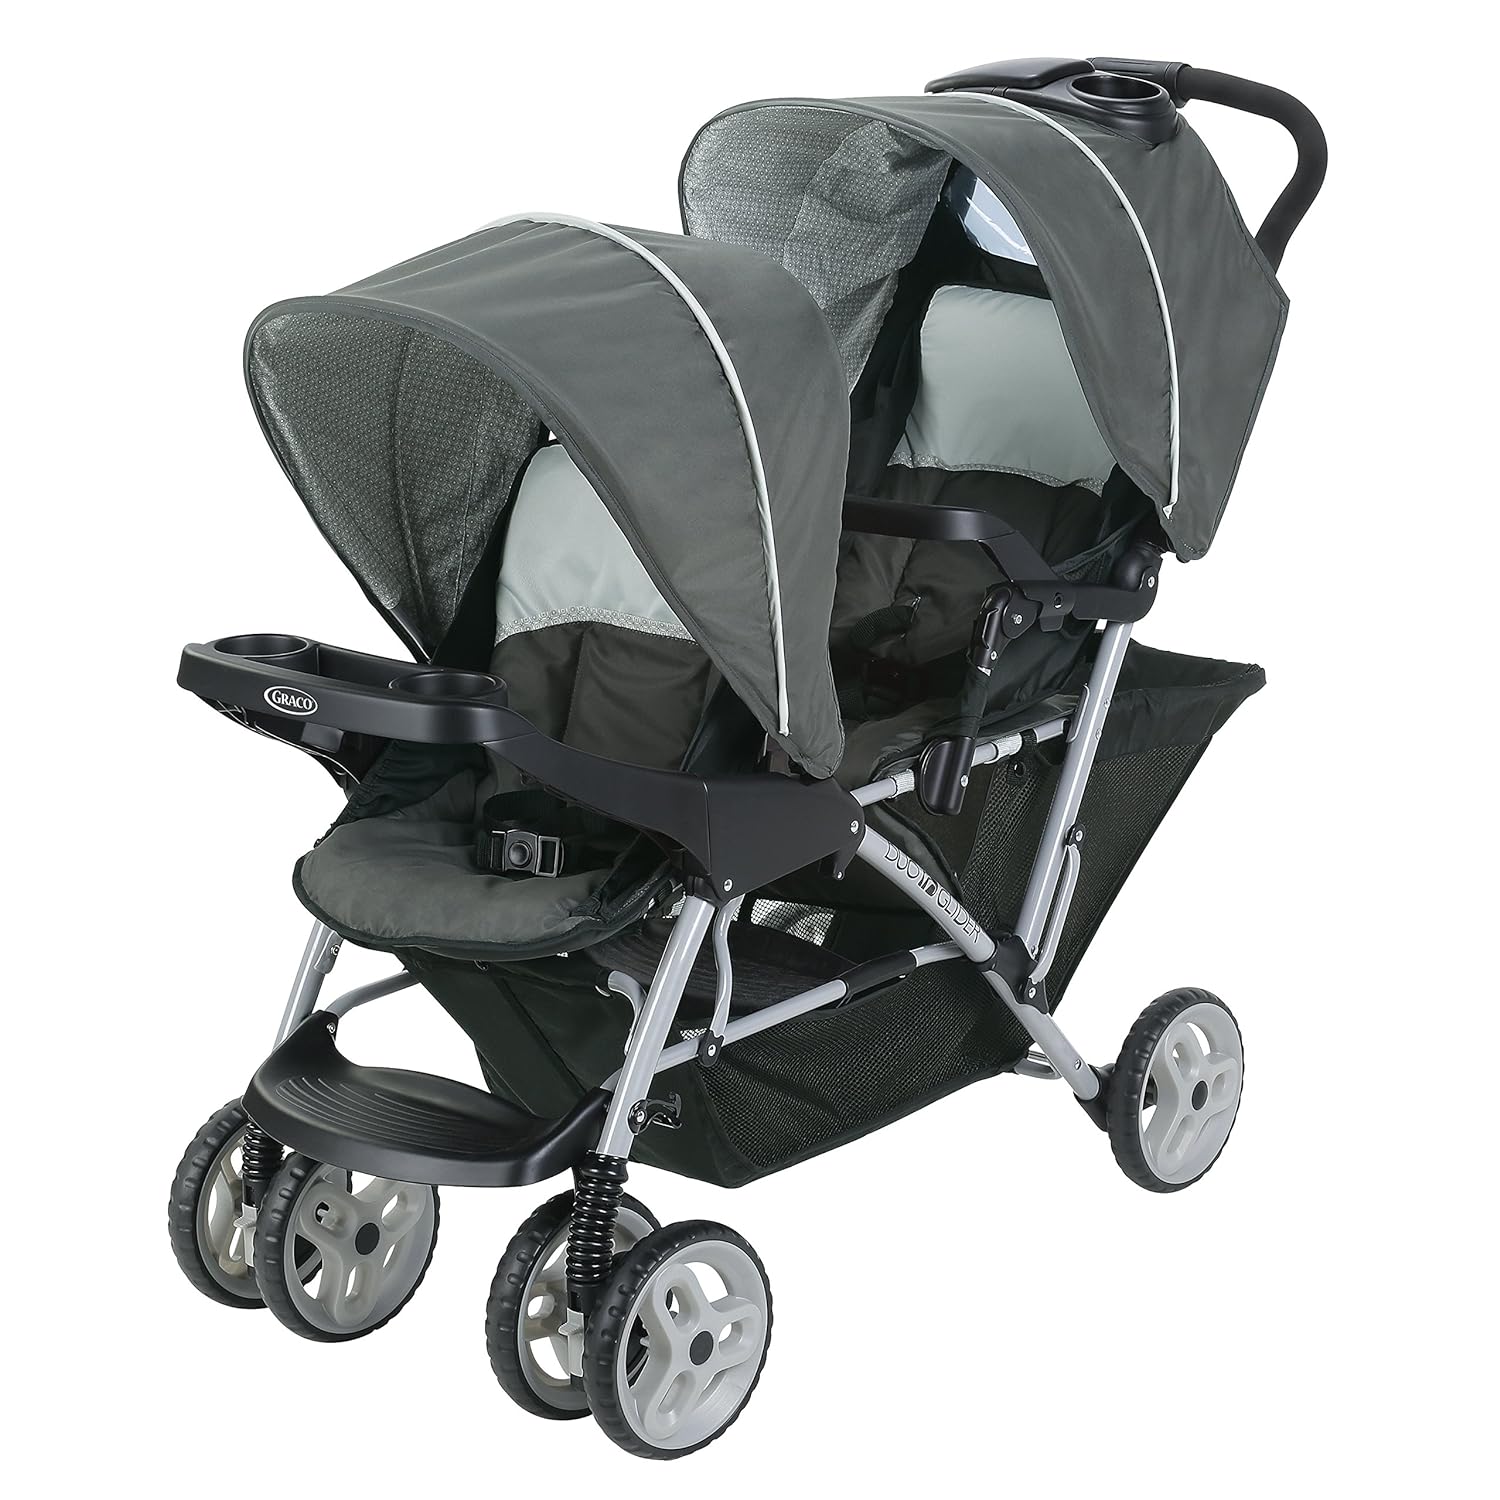 Best Stroller for Twins: Top Picks for Your Little Ones